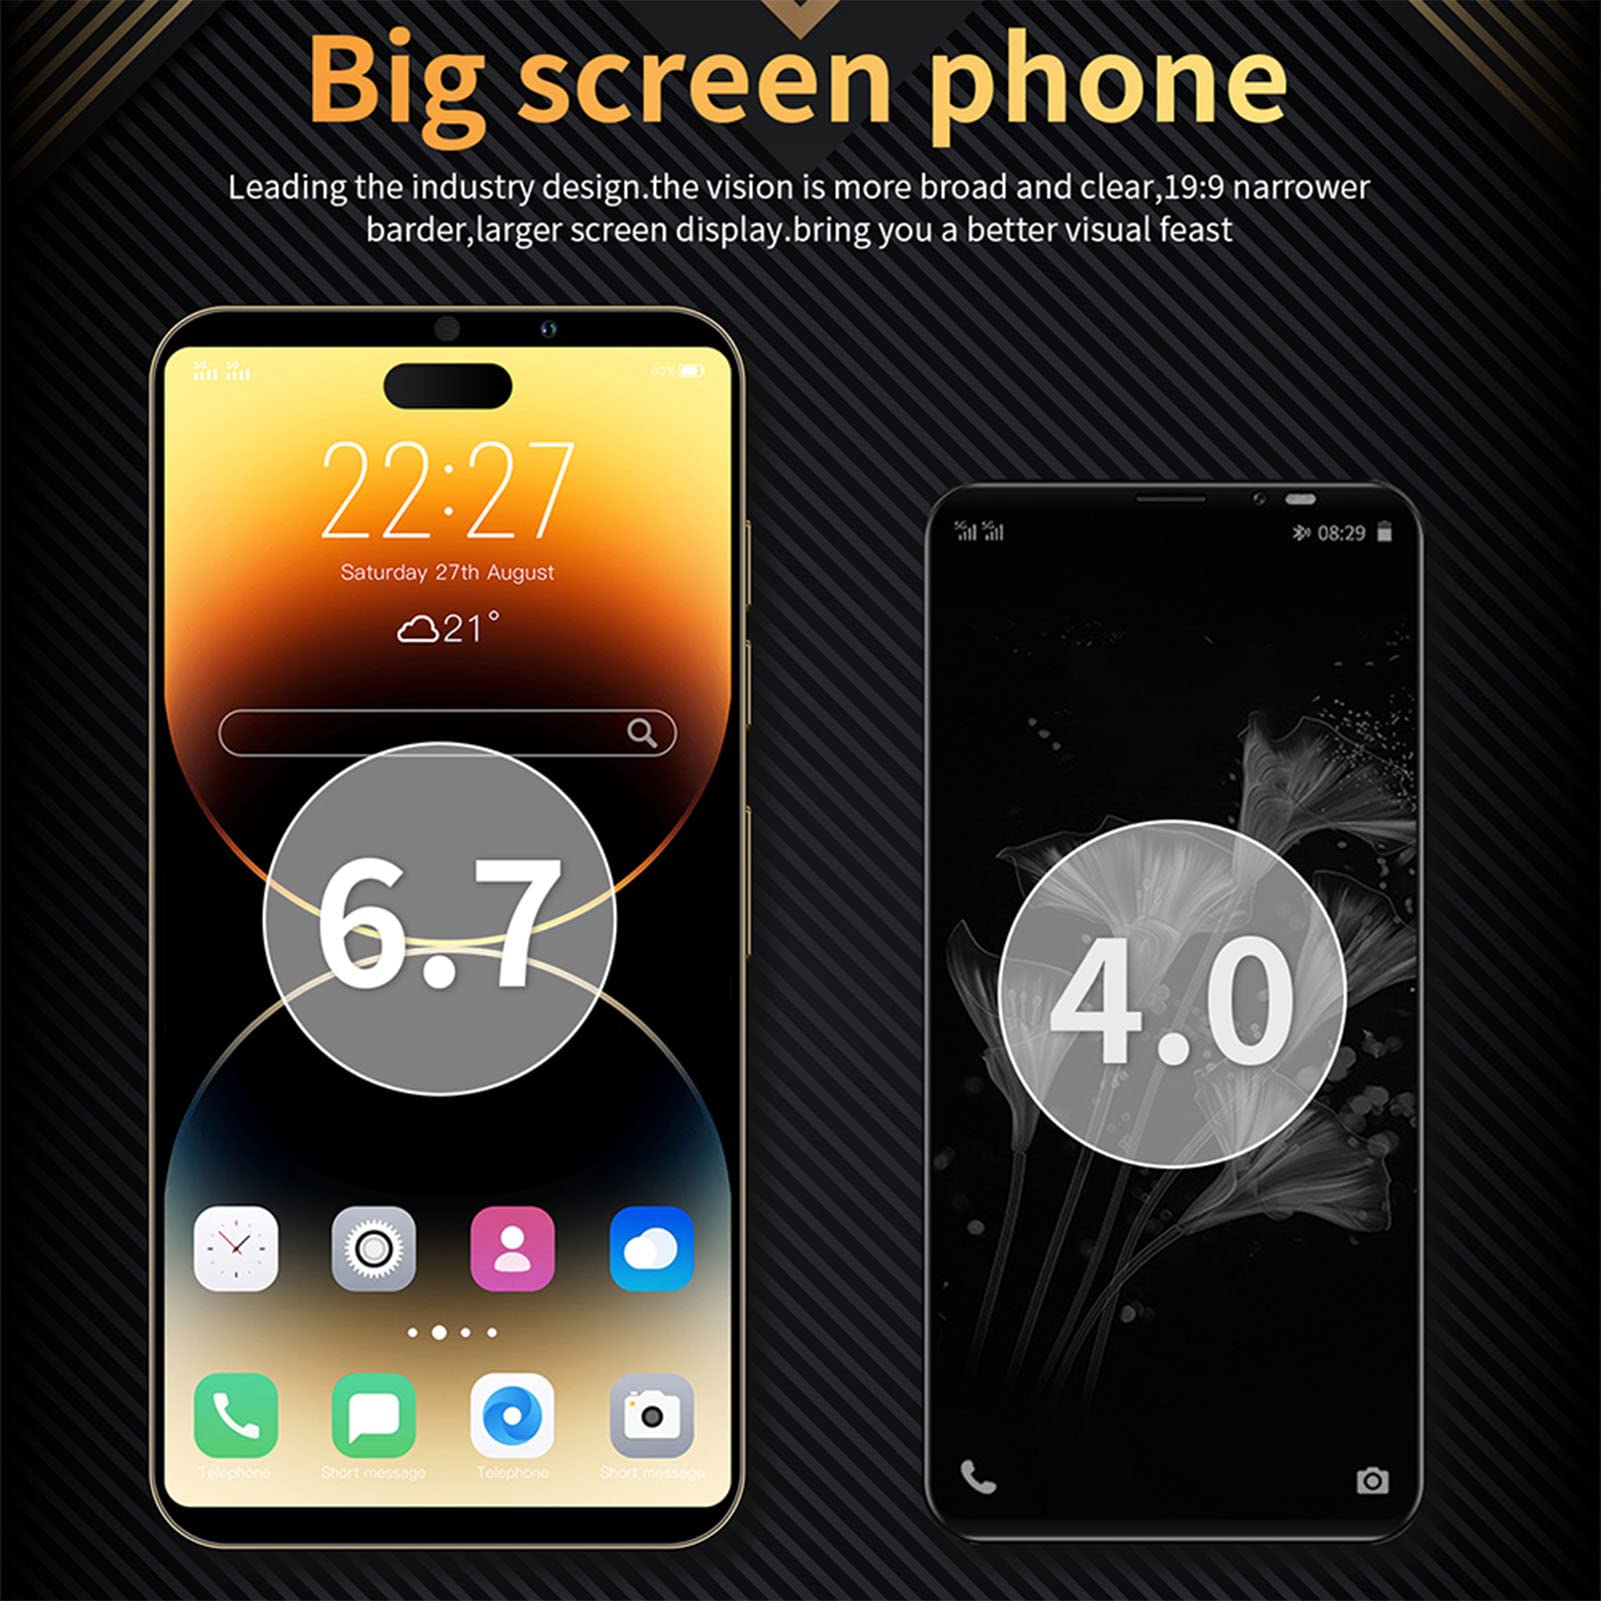 Sanpyl 6.1in Smart Phone for Android 11.0, RAM 4GB ROM 64GB, BT 5.0, 2G 5G WiFi, Front 8MP + Rear 16MP, 7000mAh, GPS, Ten Core 2.0GHz Mobile Phone with Type C 3.5mm Port (US Plug)